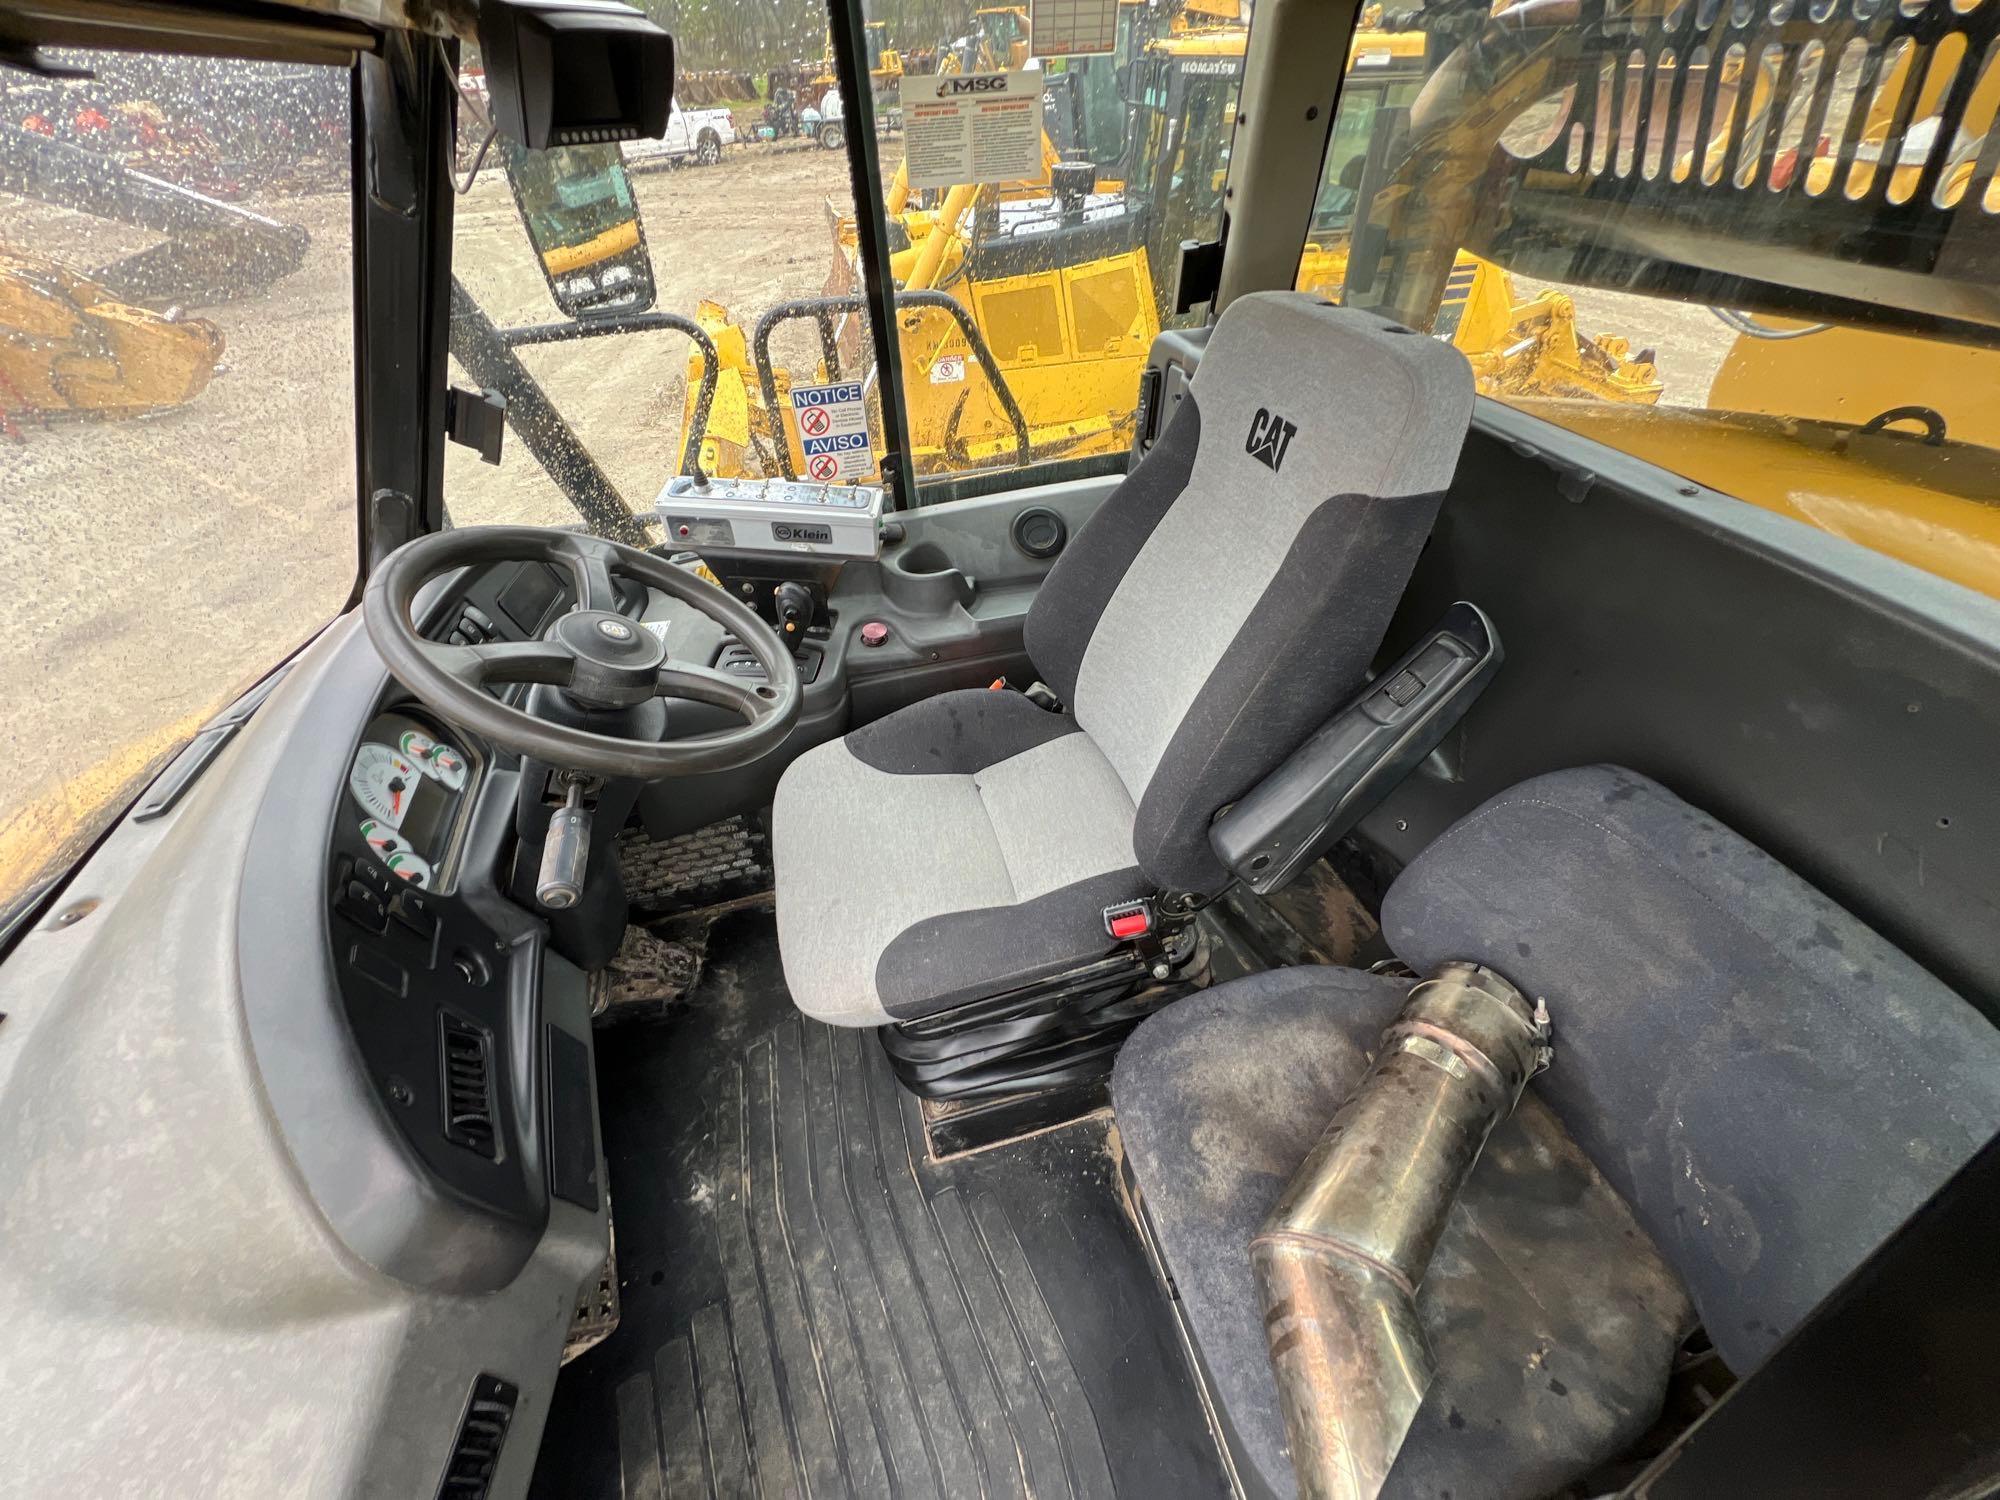 2013 CAT 725 WATER TRUCK SN:CAT00725HB1L03142 6x6, powered by Cat C11 diesel engine, equipped with